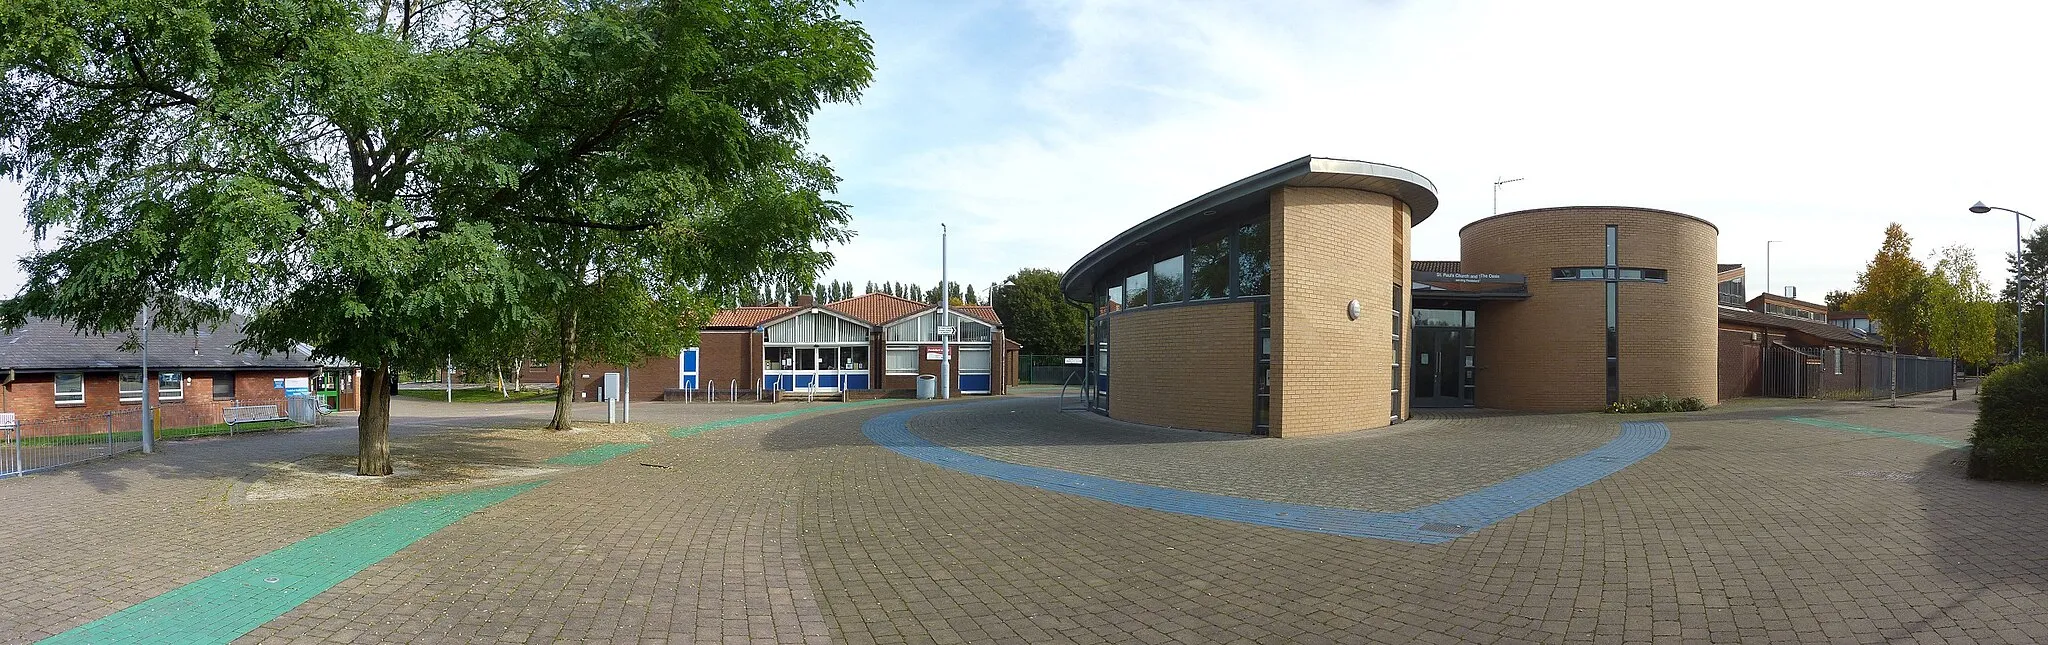 Photo showing: A panorama of Pendeford Square, showing the Health Centre, Library, St Paul's CofE School, and Pendeford Church. Taken on 7th October 2012.